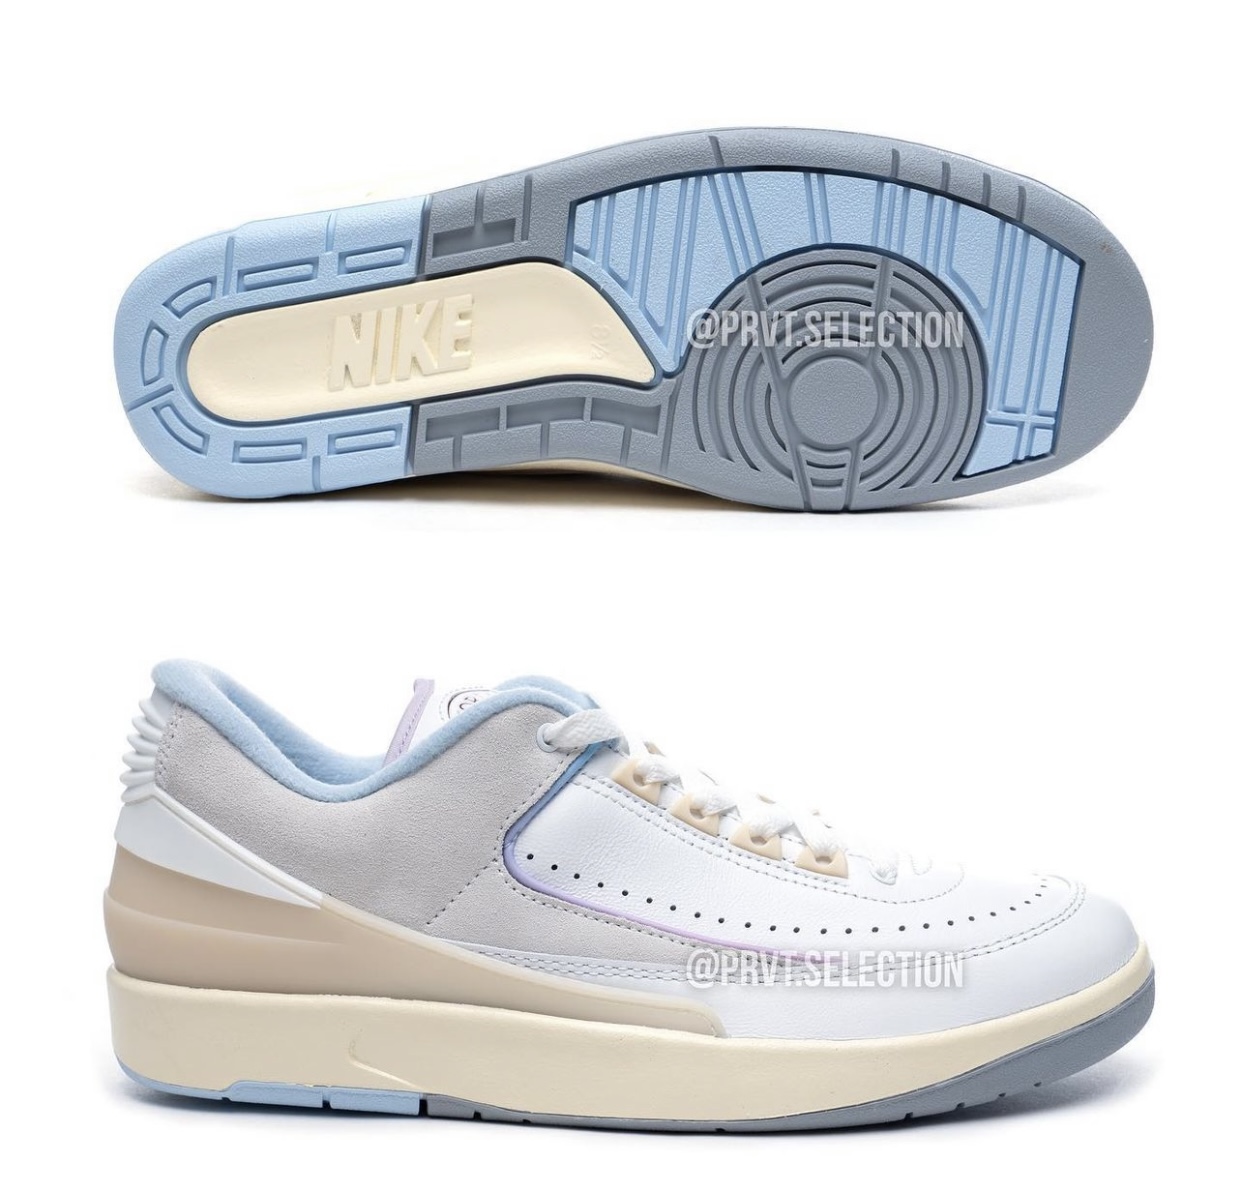 Air Jordan 2 Low Look Up In The Air DX4401-146 WMNS Release Date Price